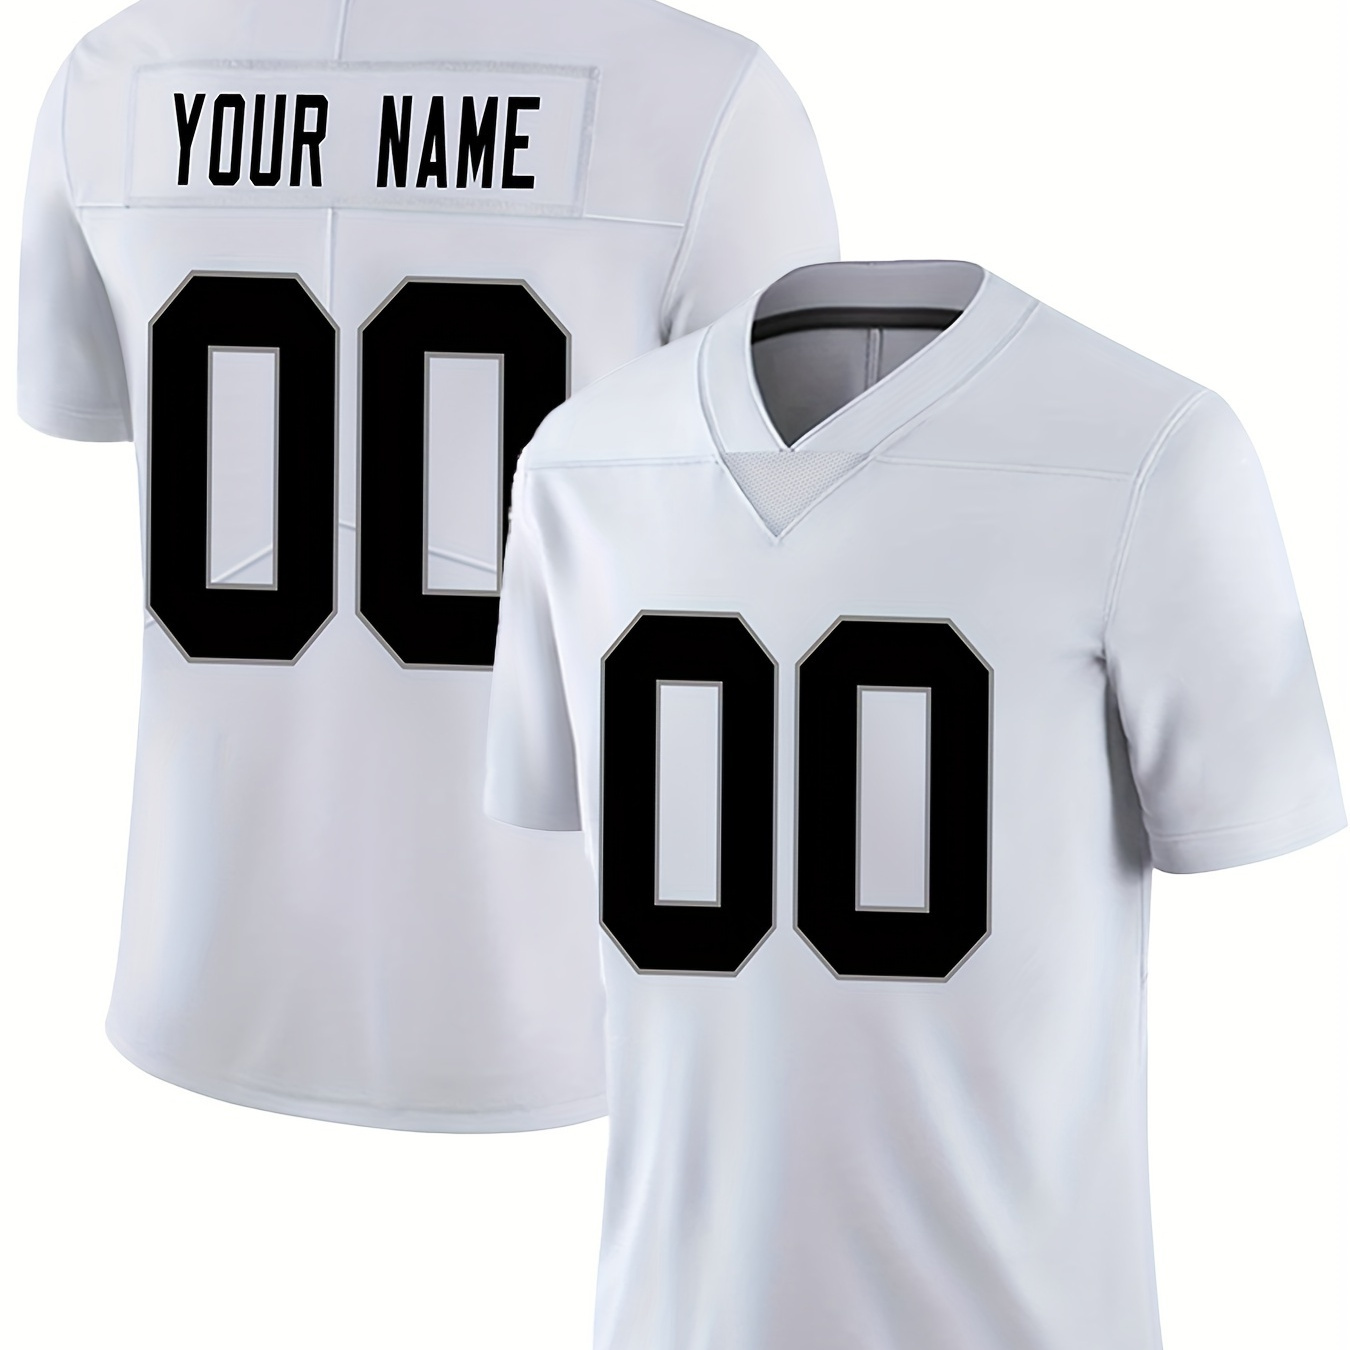 

Customized Name And Number Embroidery Men's Short Sleeve Loose V-neck Rugby Jersey, Outdoor Breathable Uniform For Team Training